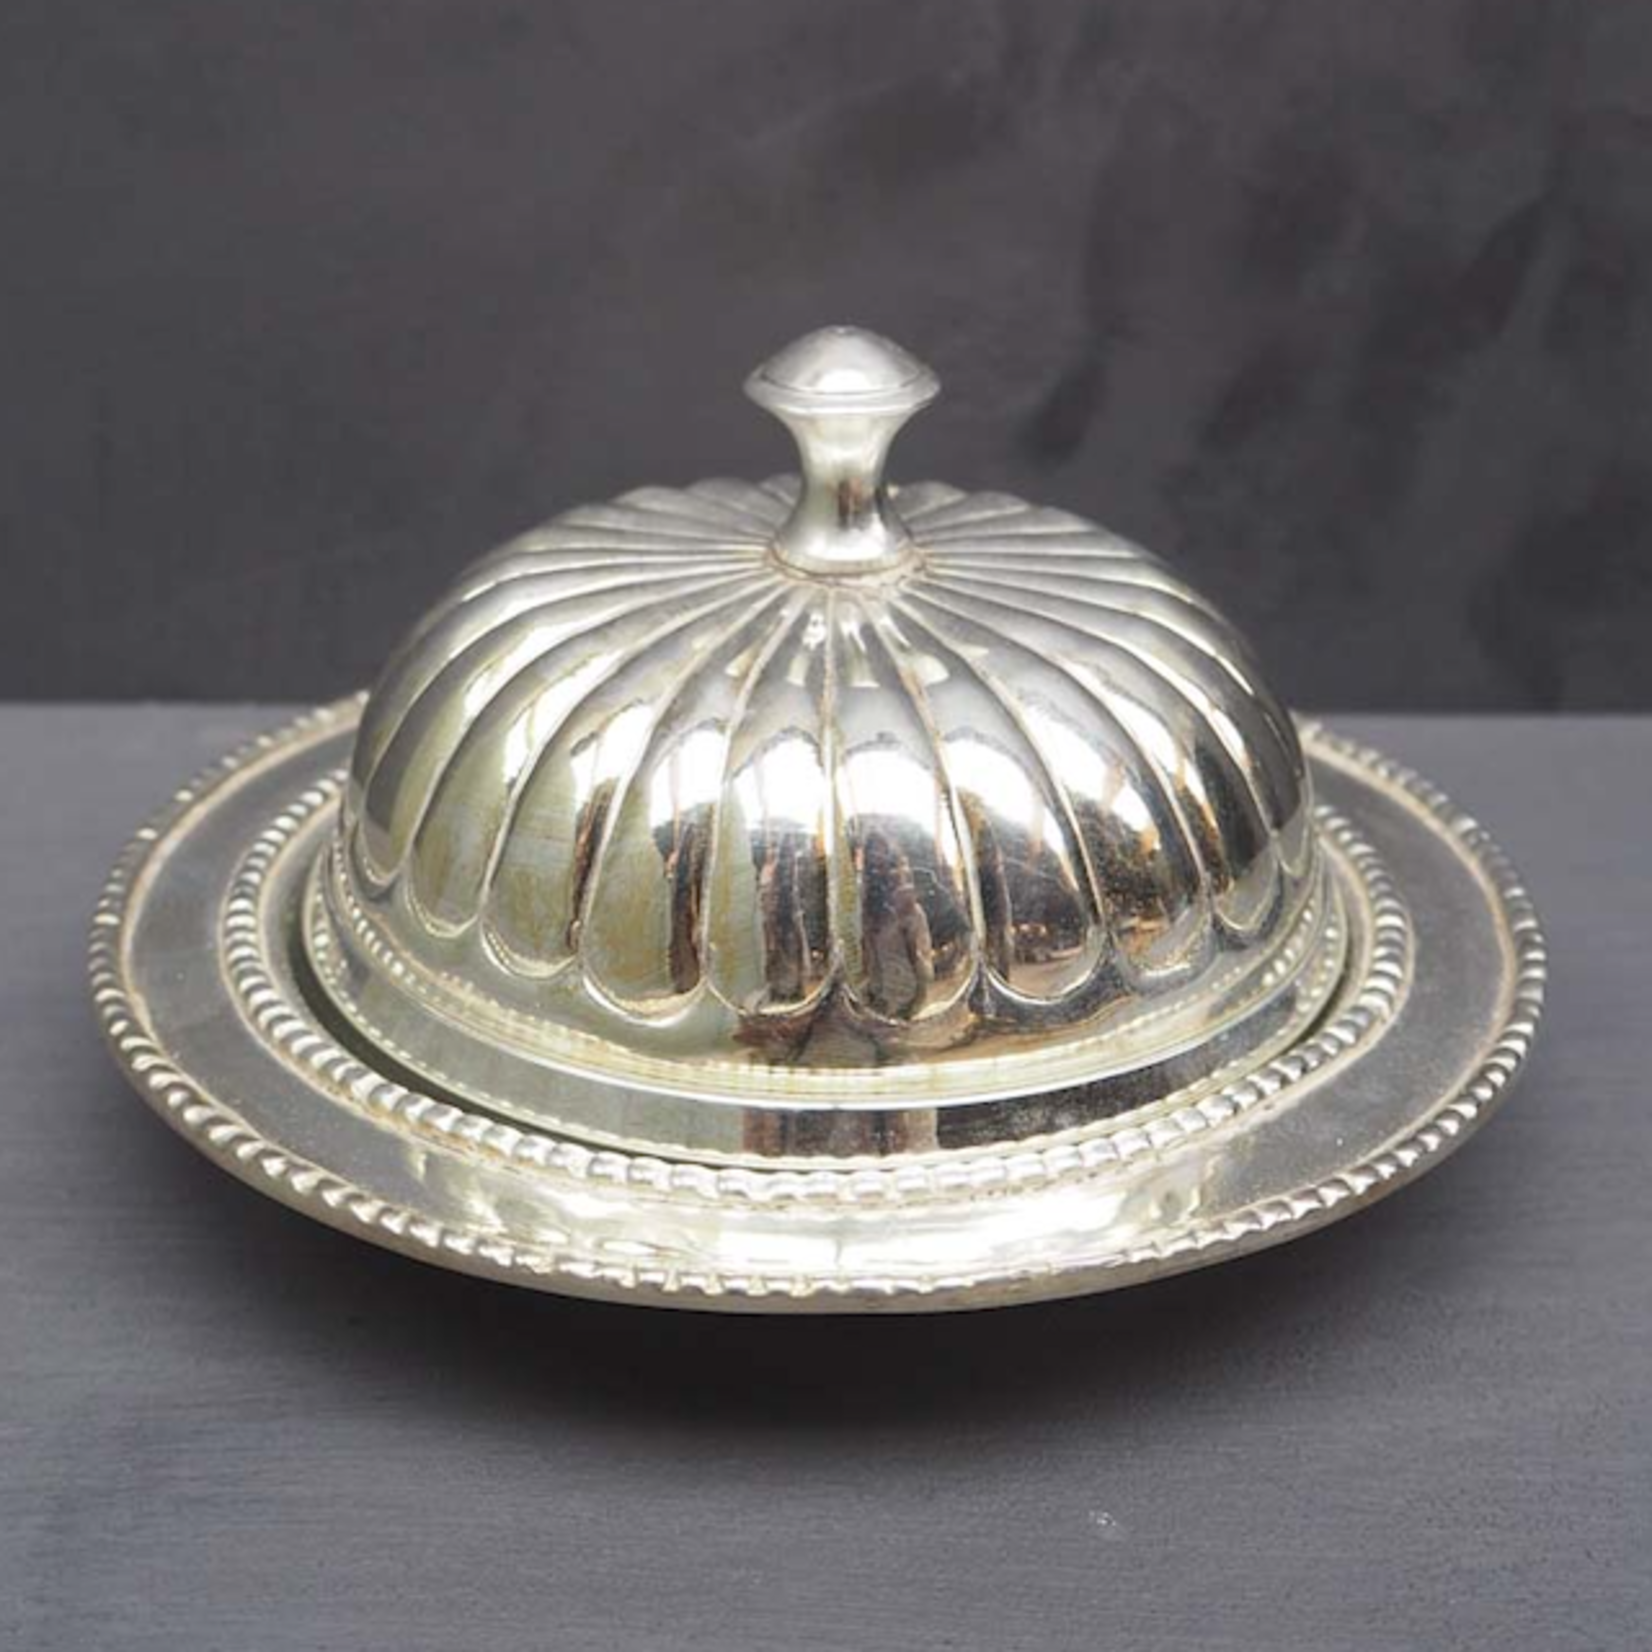 CHEHOMA ROUND BUTTER POT ANTIQUE SILVER